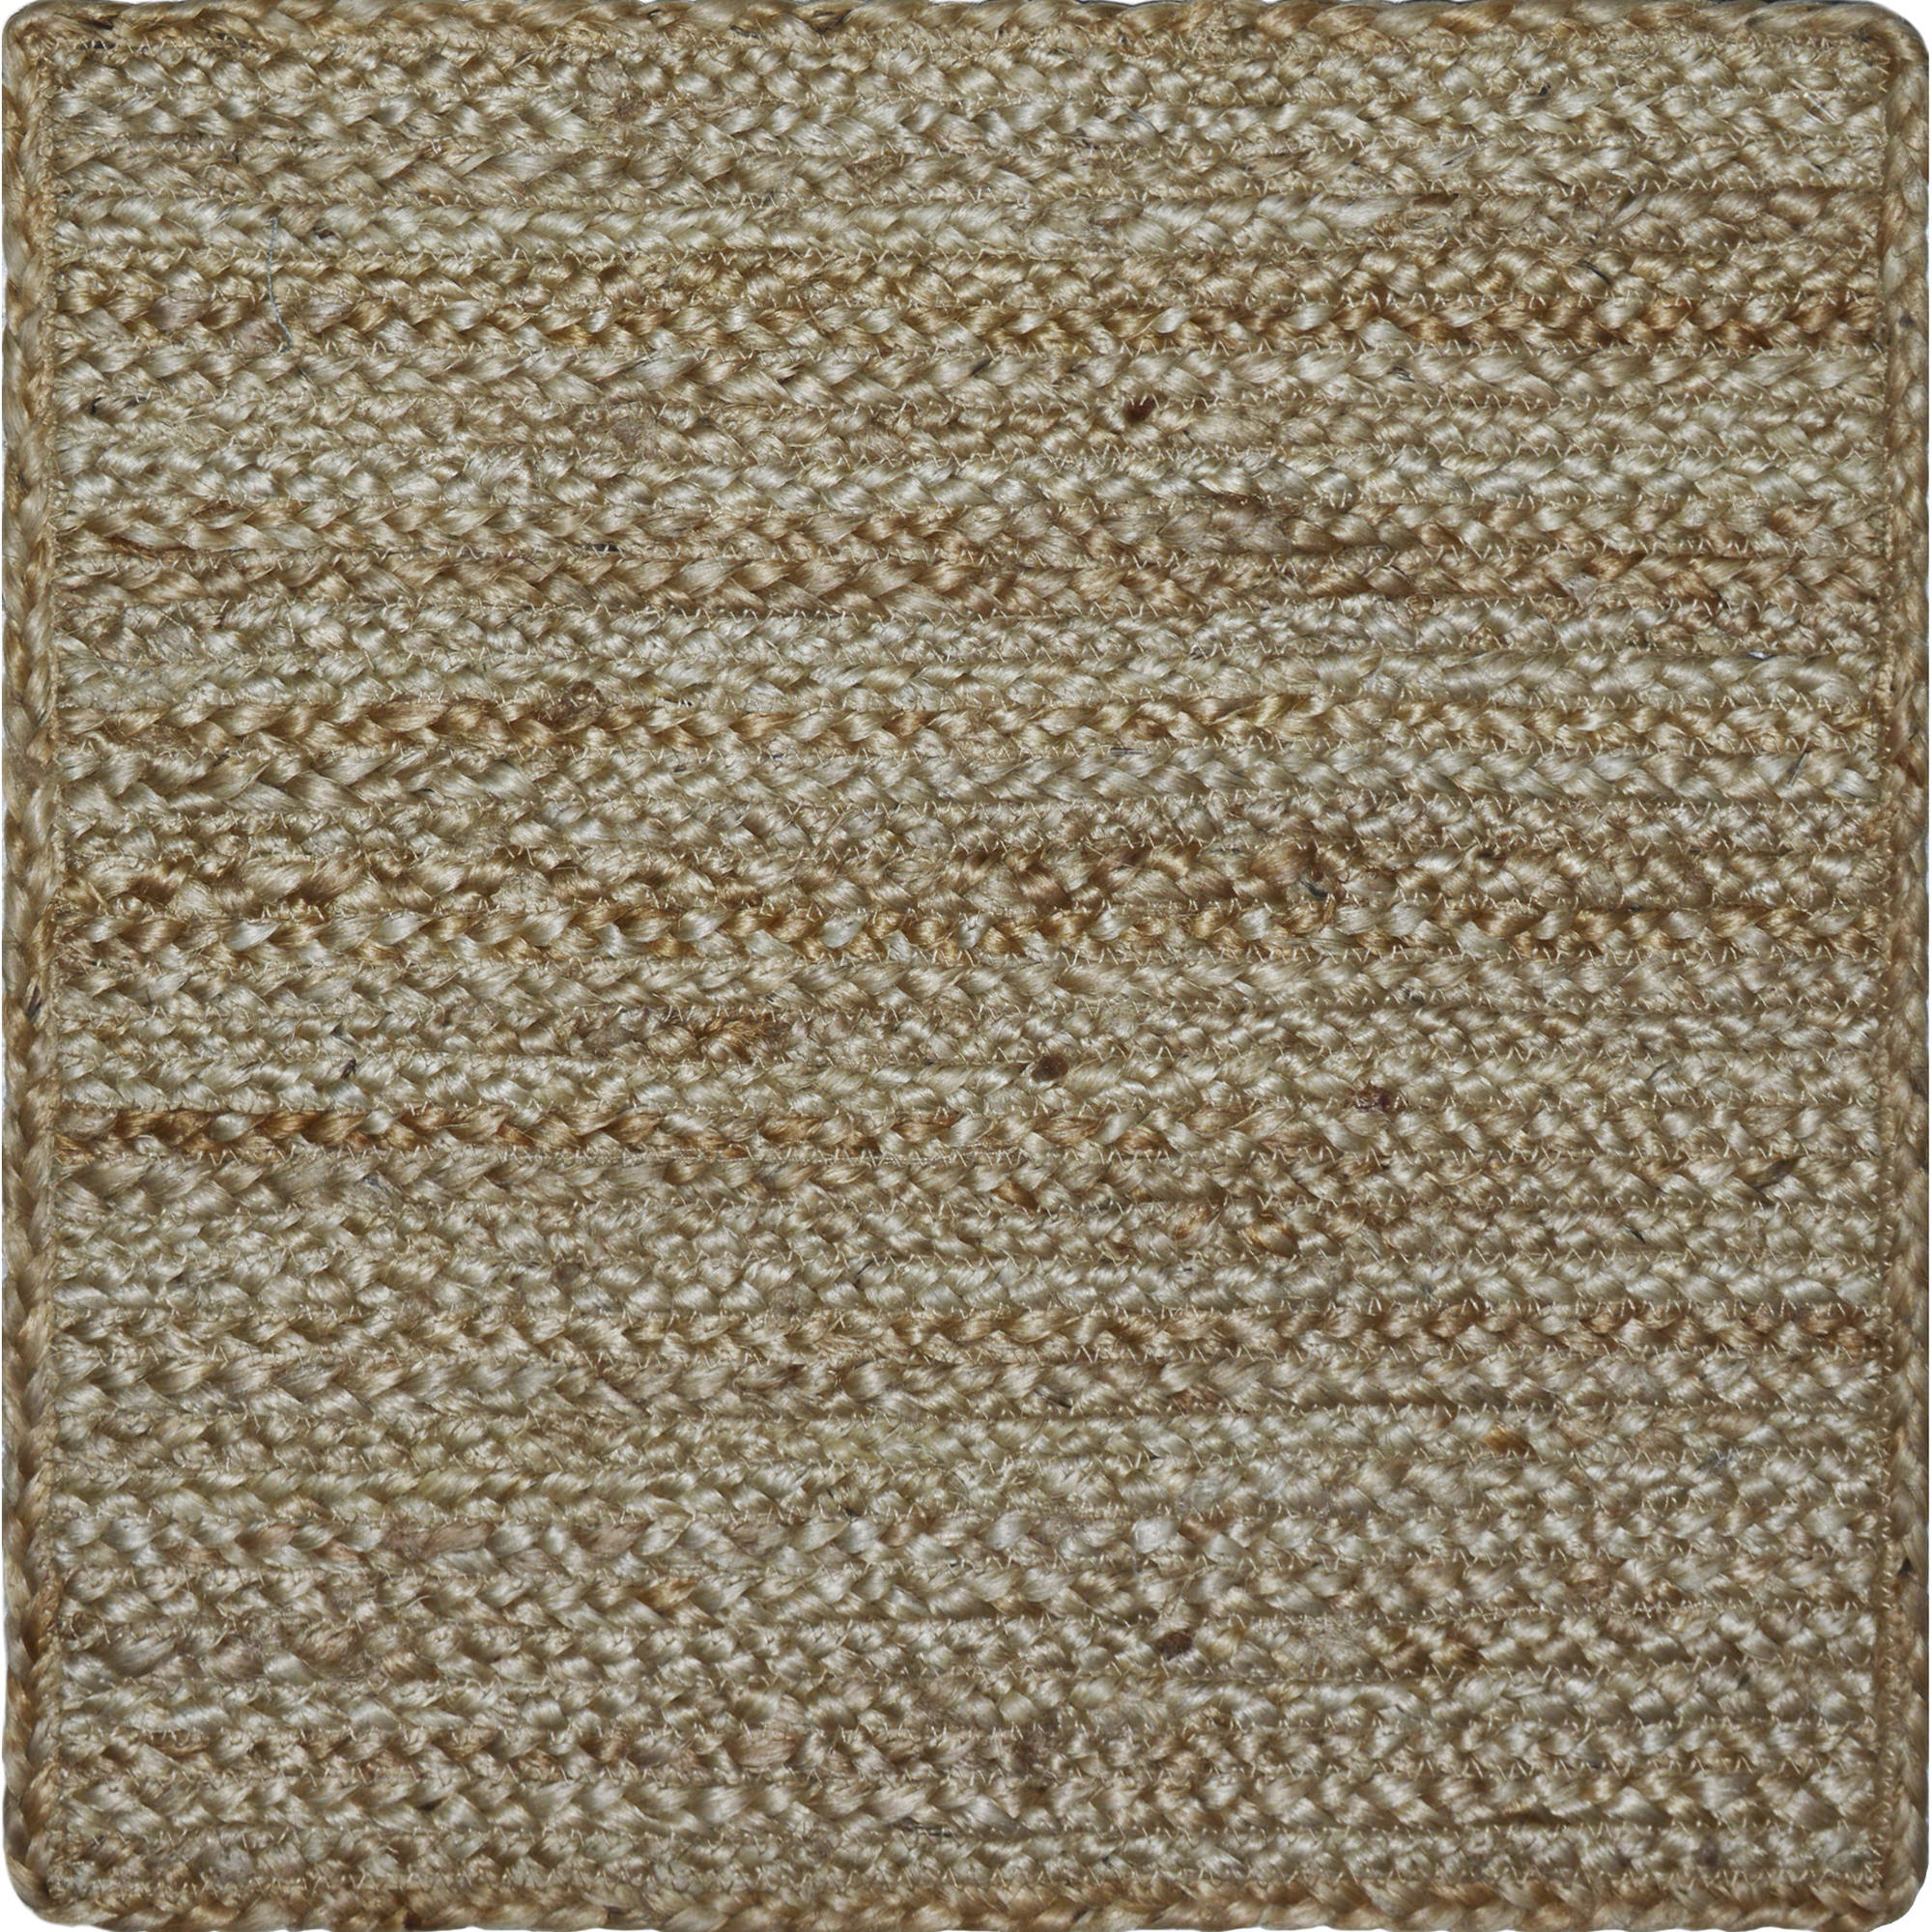 Better Homes & Gardens Jute Braid 14" Natural Color Square Table Place Mat - image 1 of 2